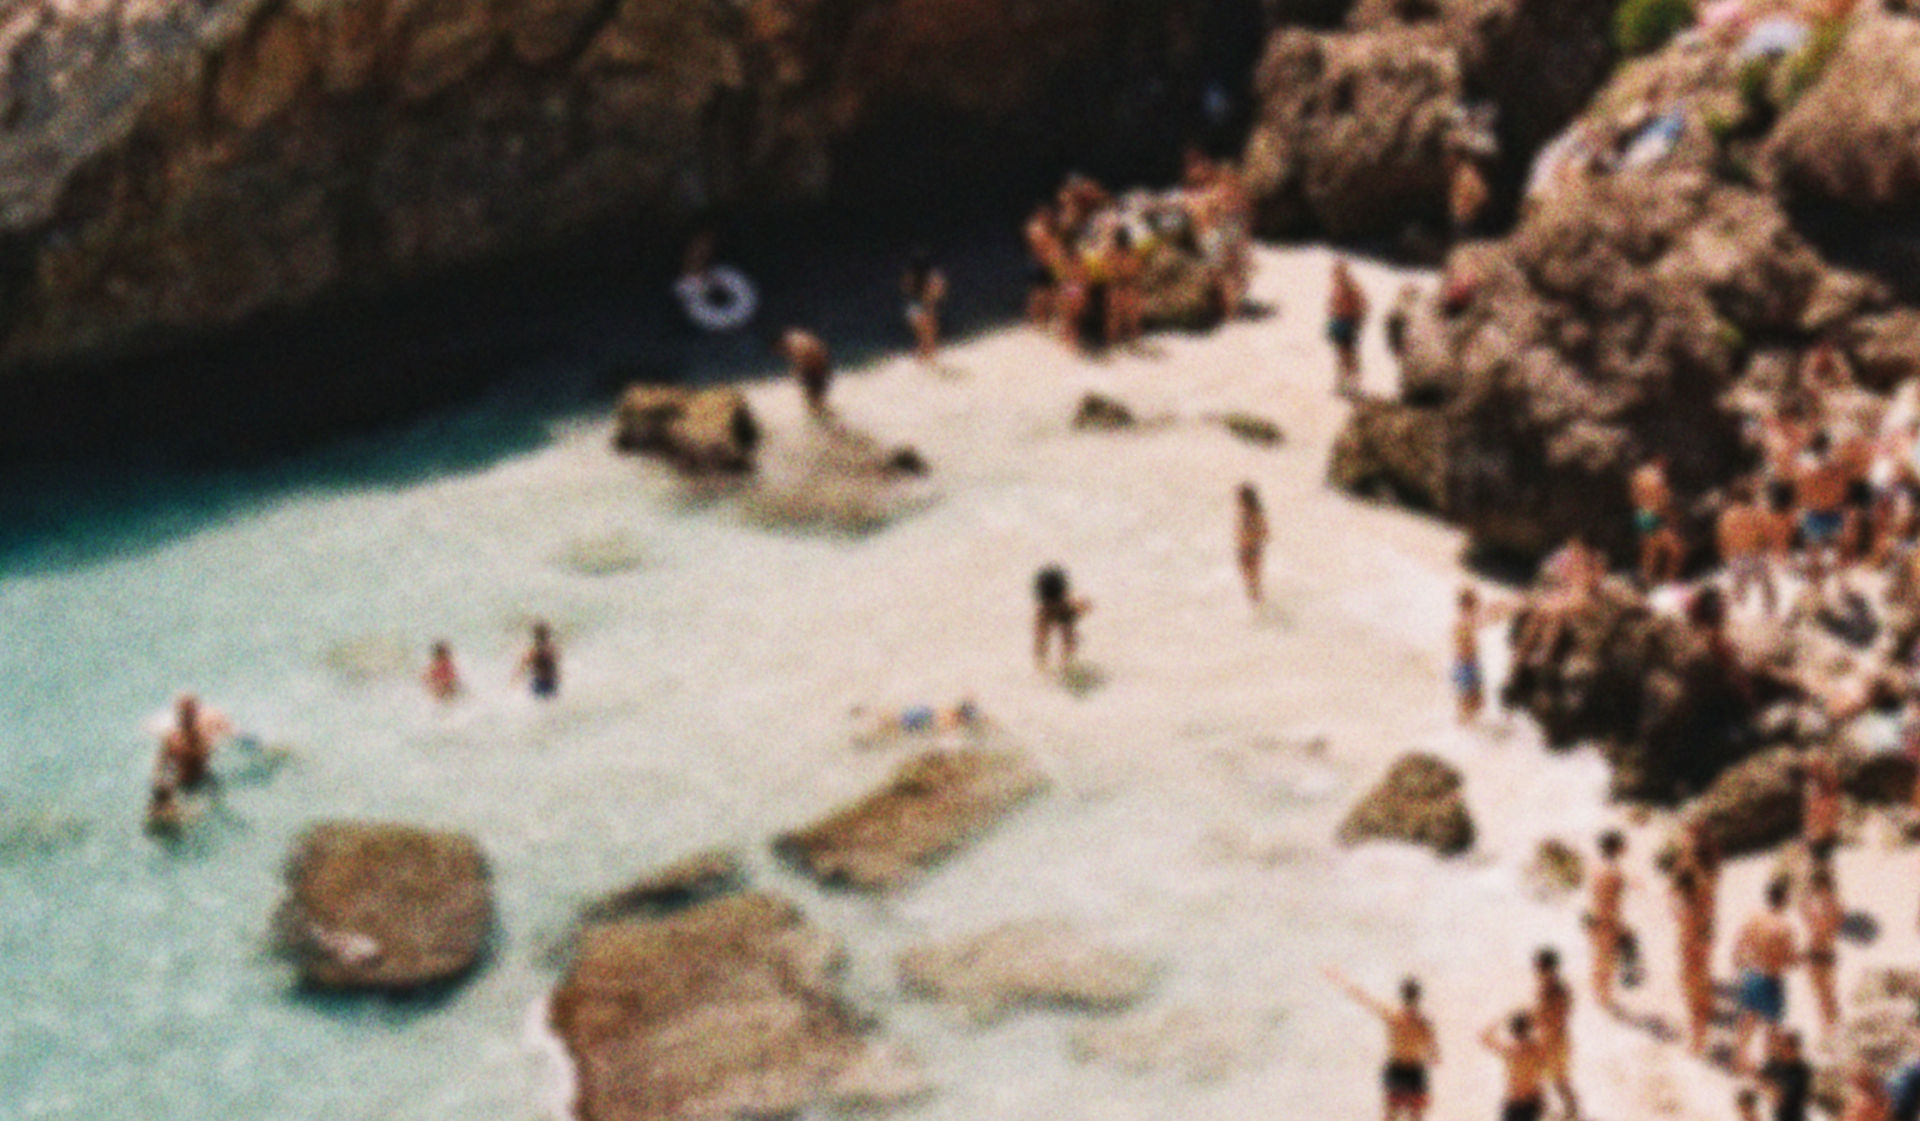 Image of ocean shore with crowd.